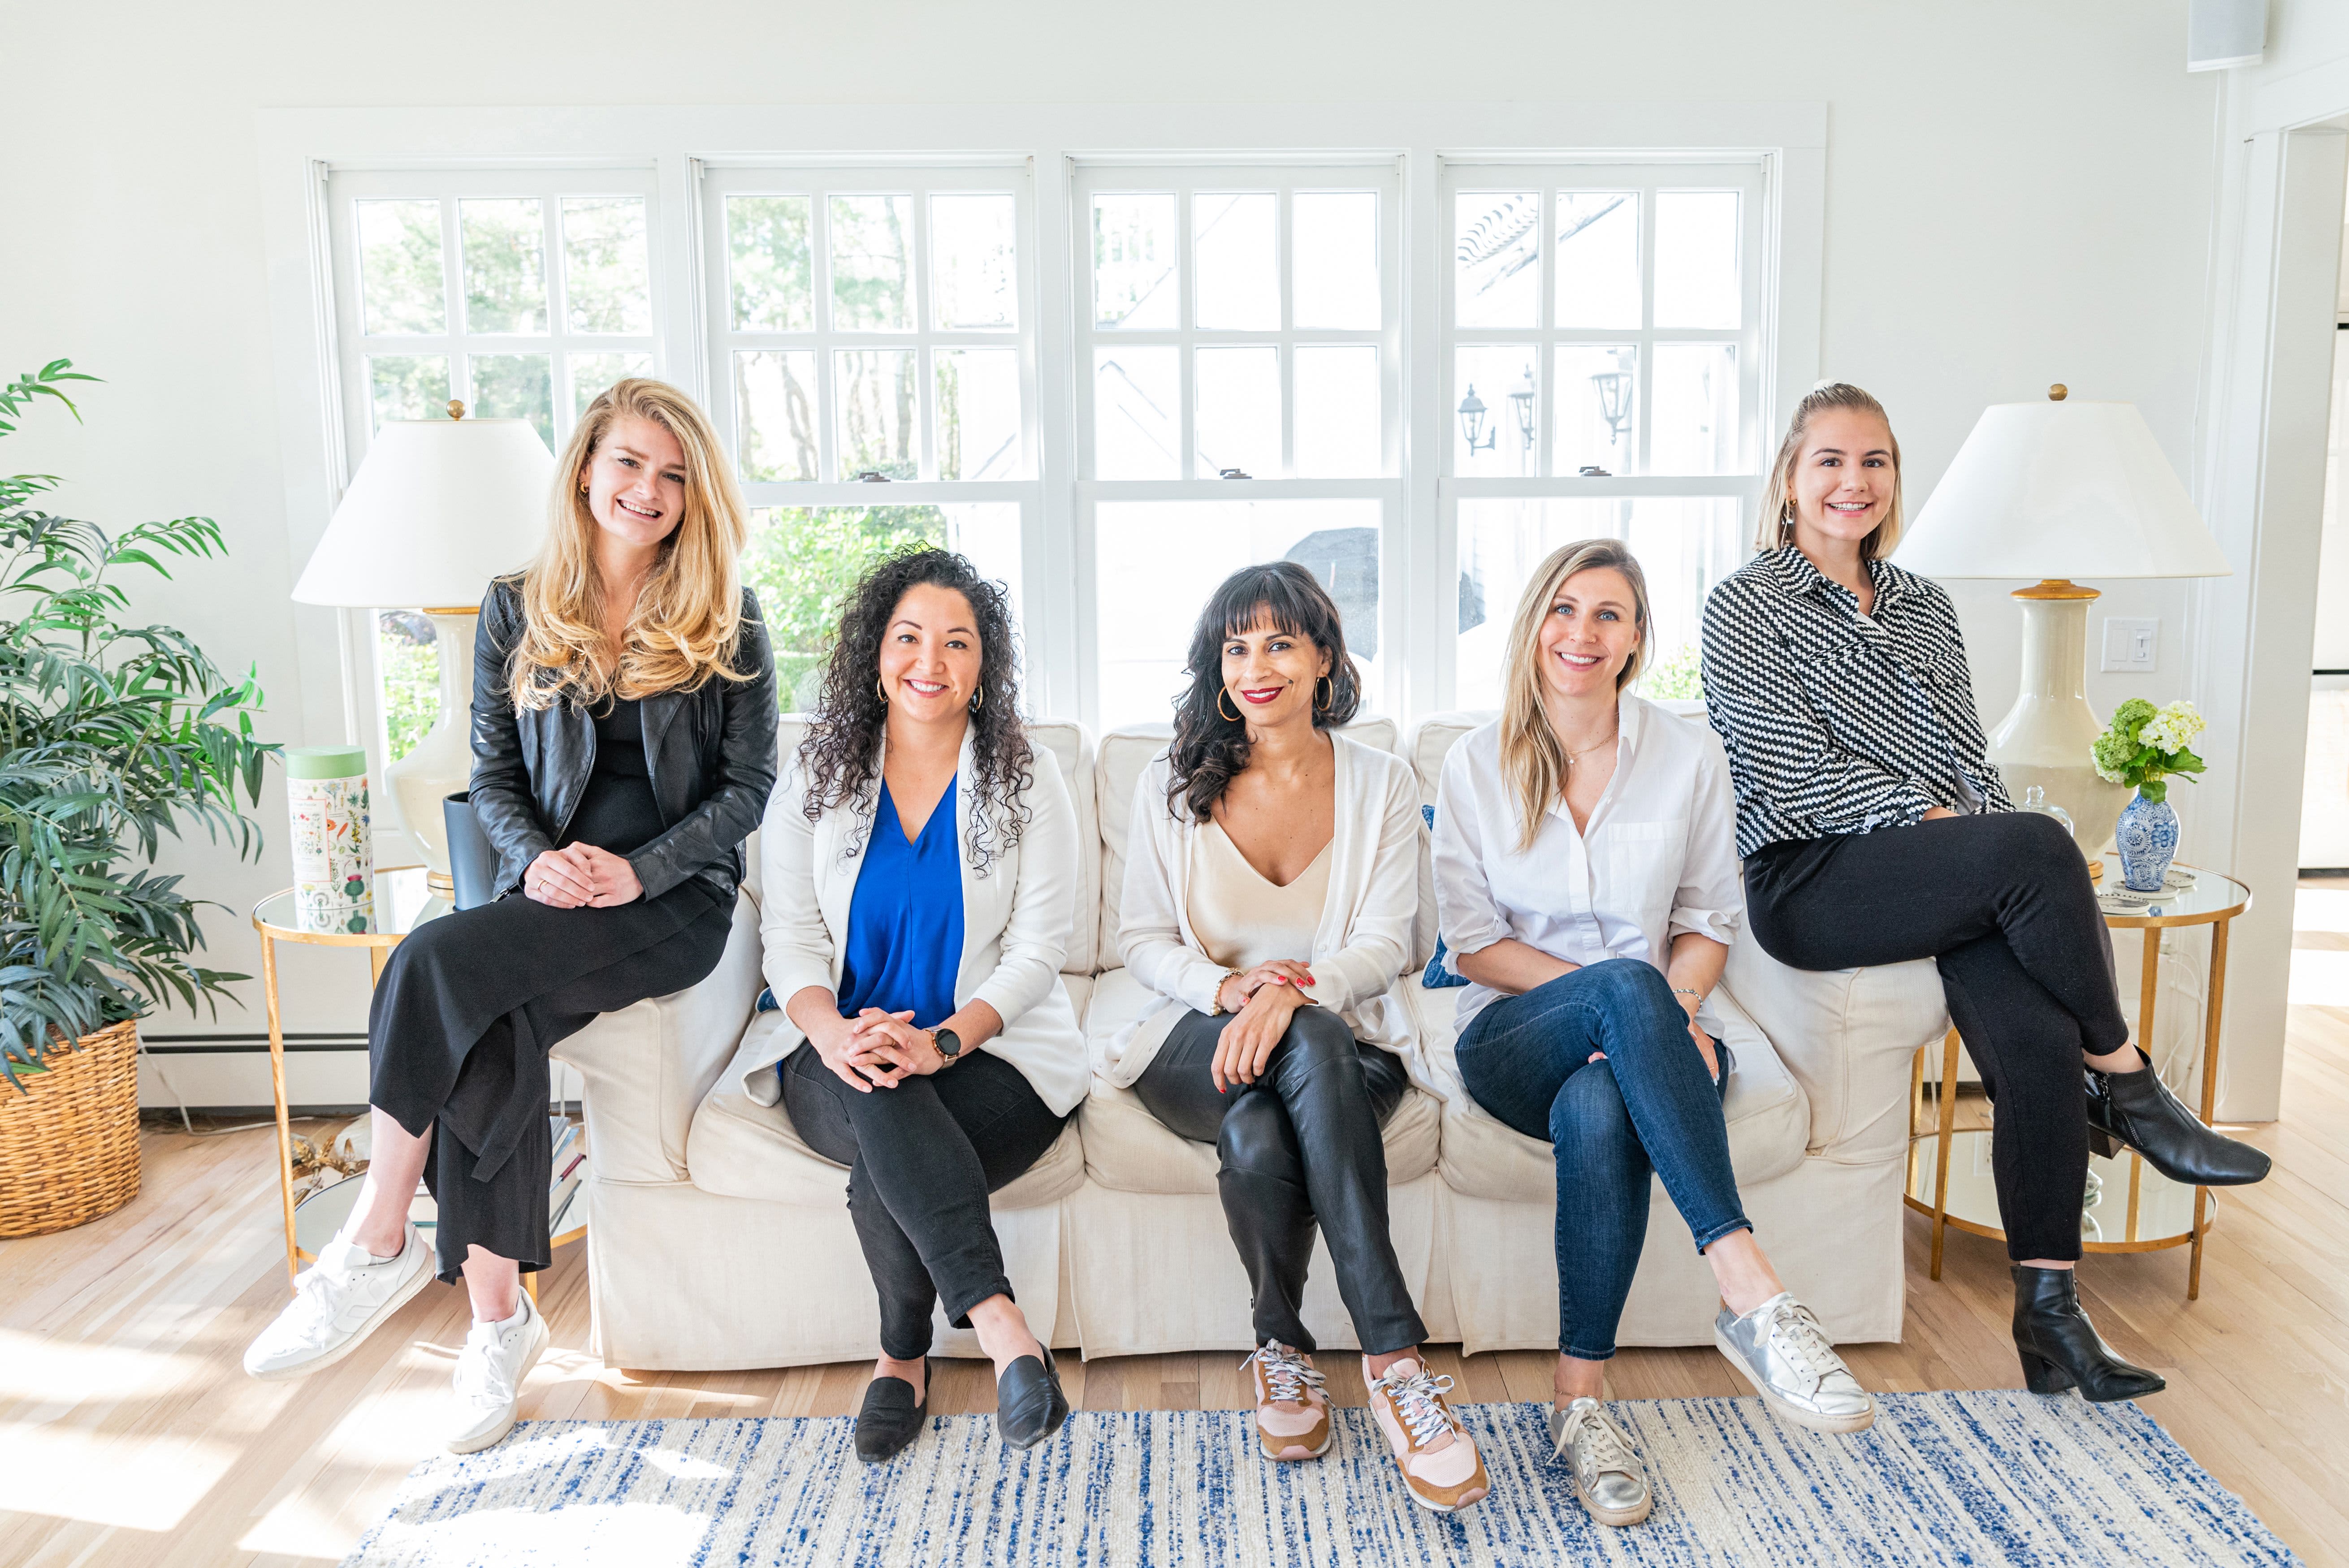 Female Founders Fund closes  million funding round, backers include Goldman Sachs and Melinda French Gates